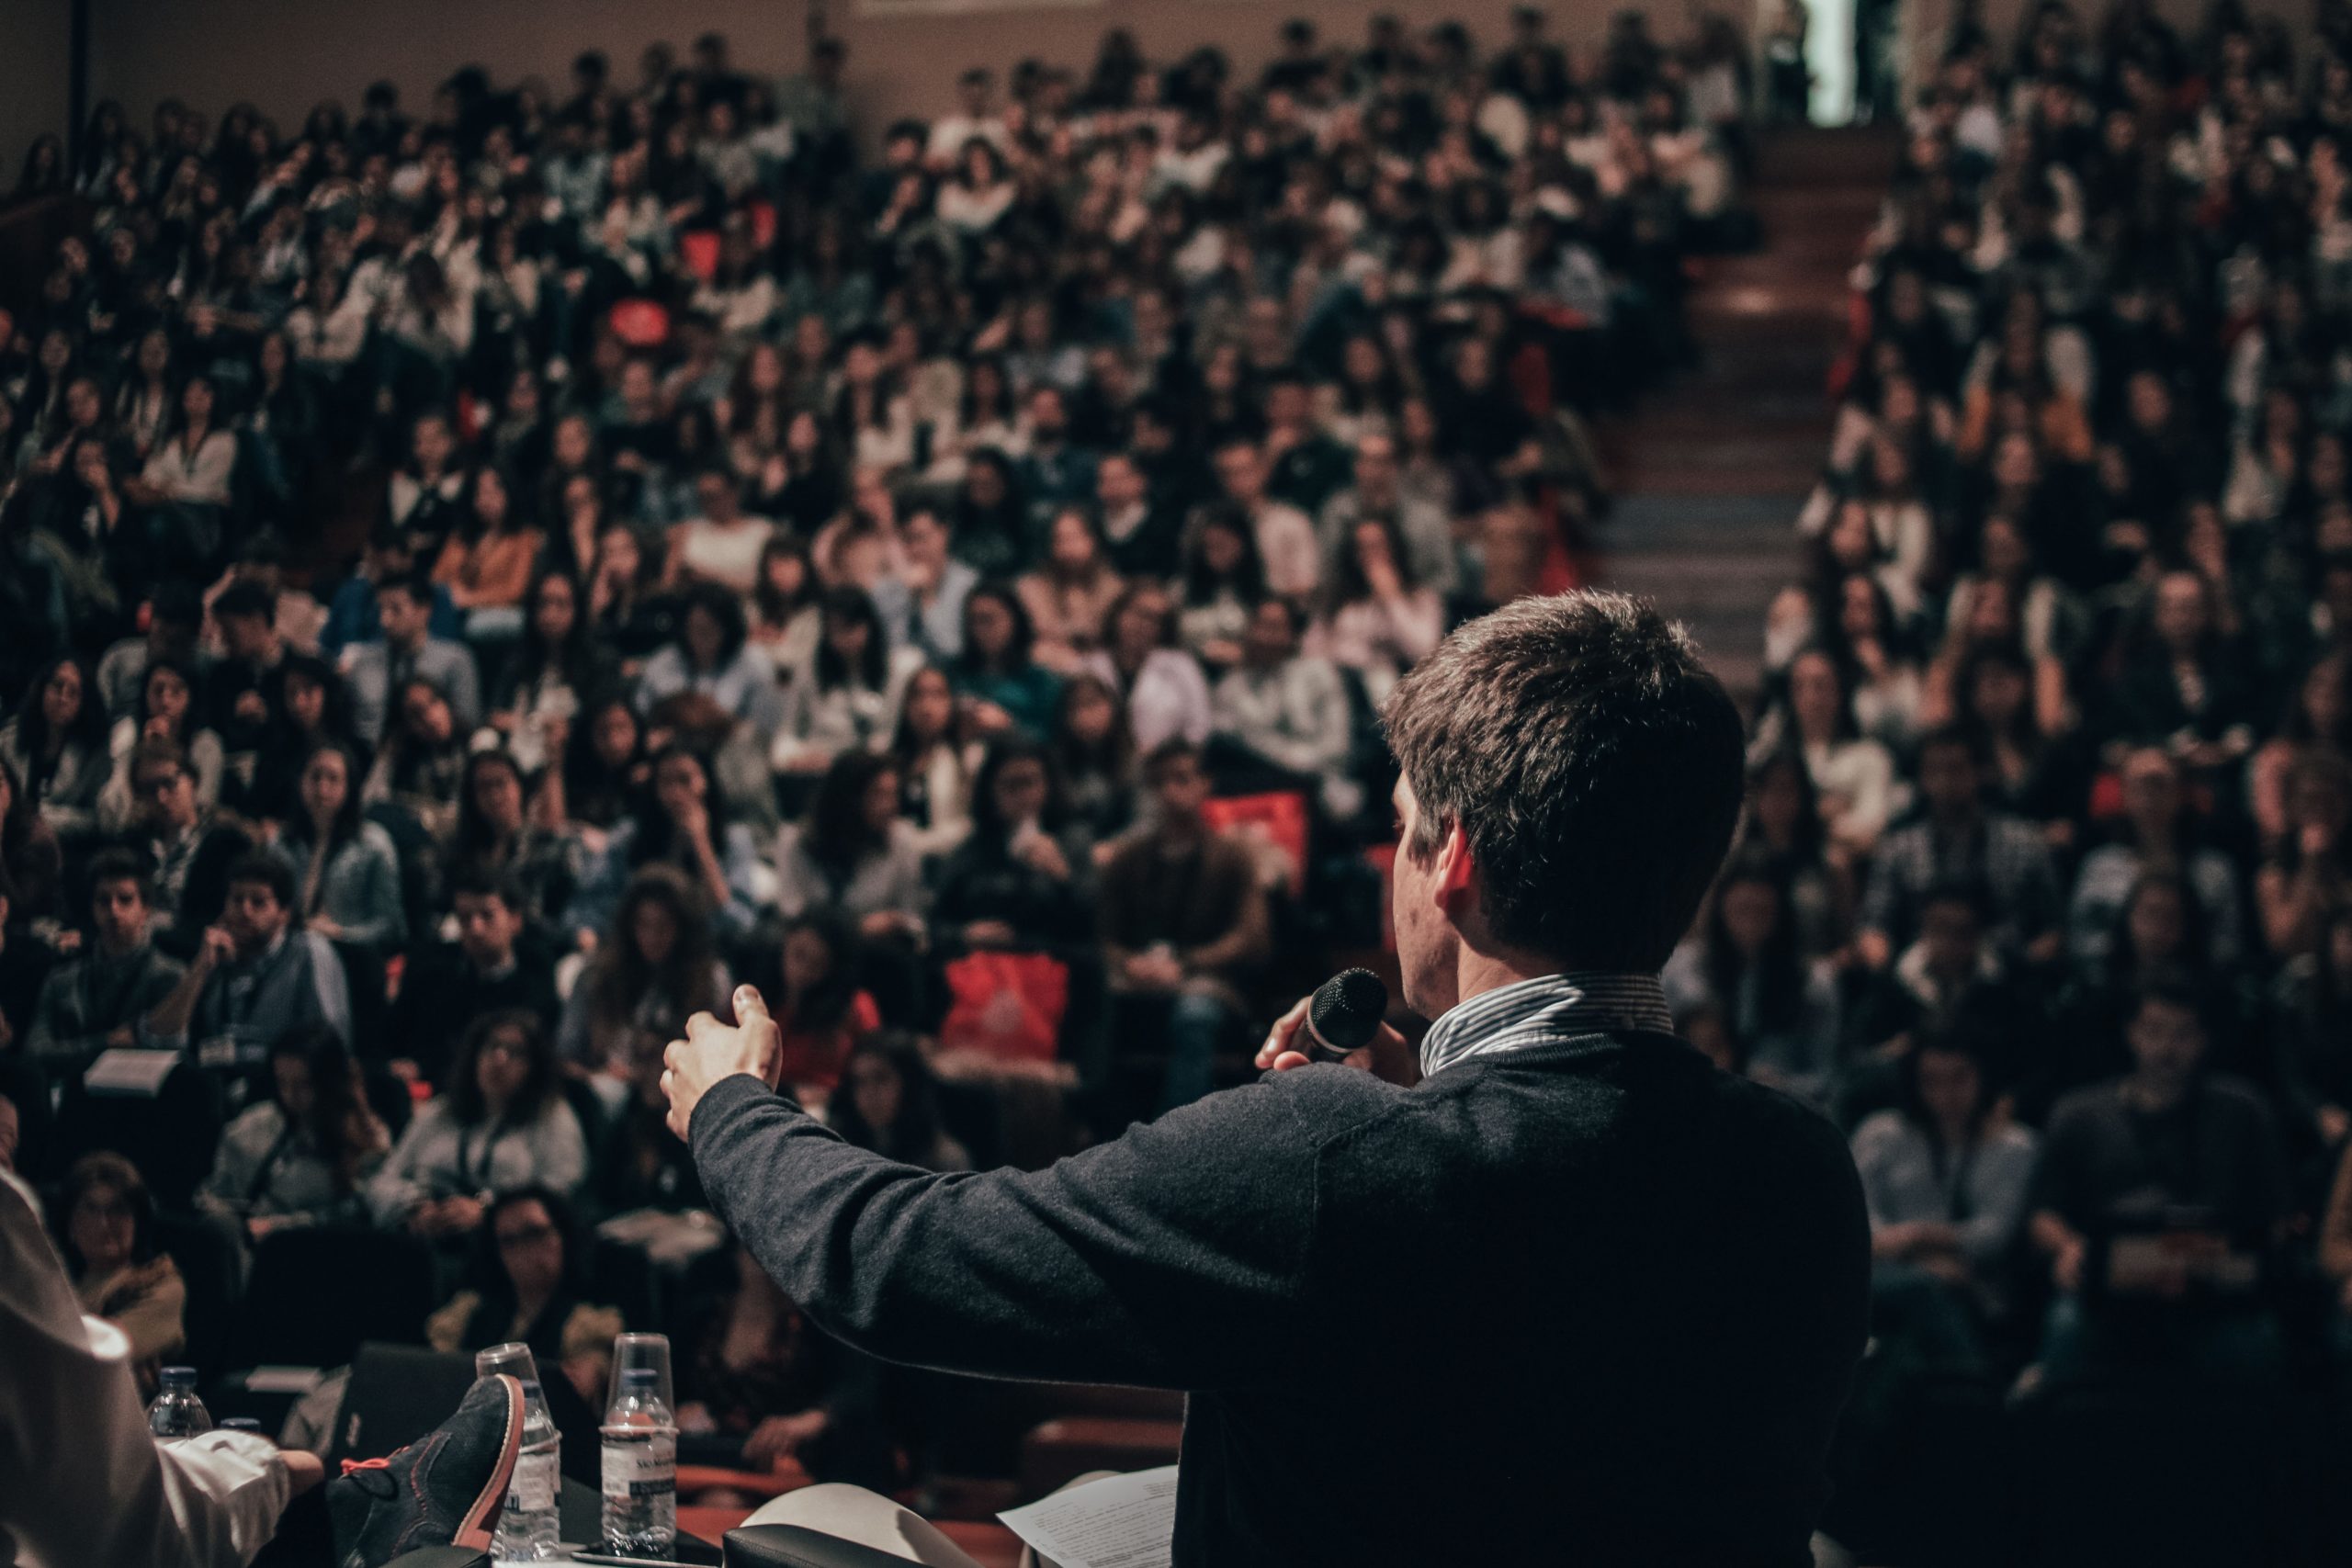 Am I being too loud? Addressing one of the fears of public speaking.